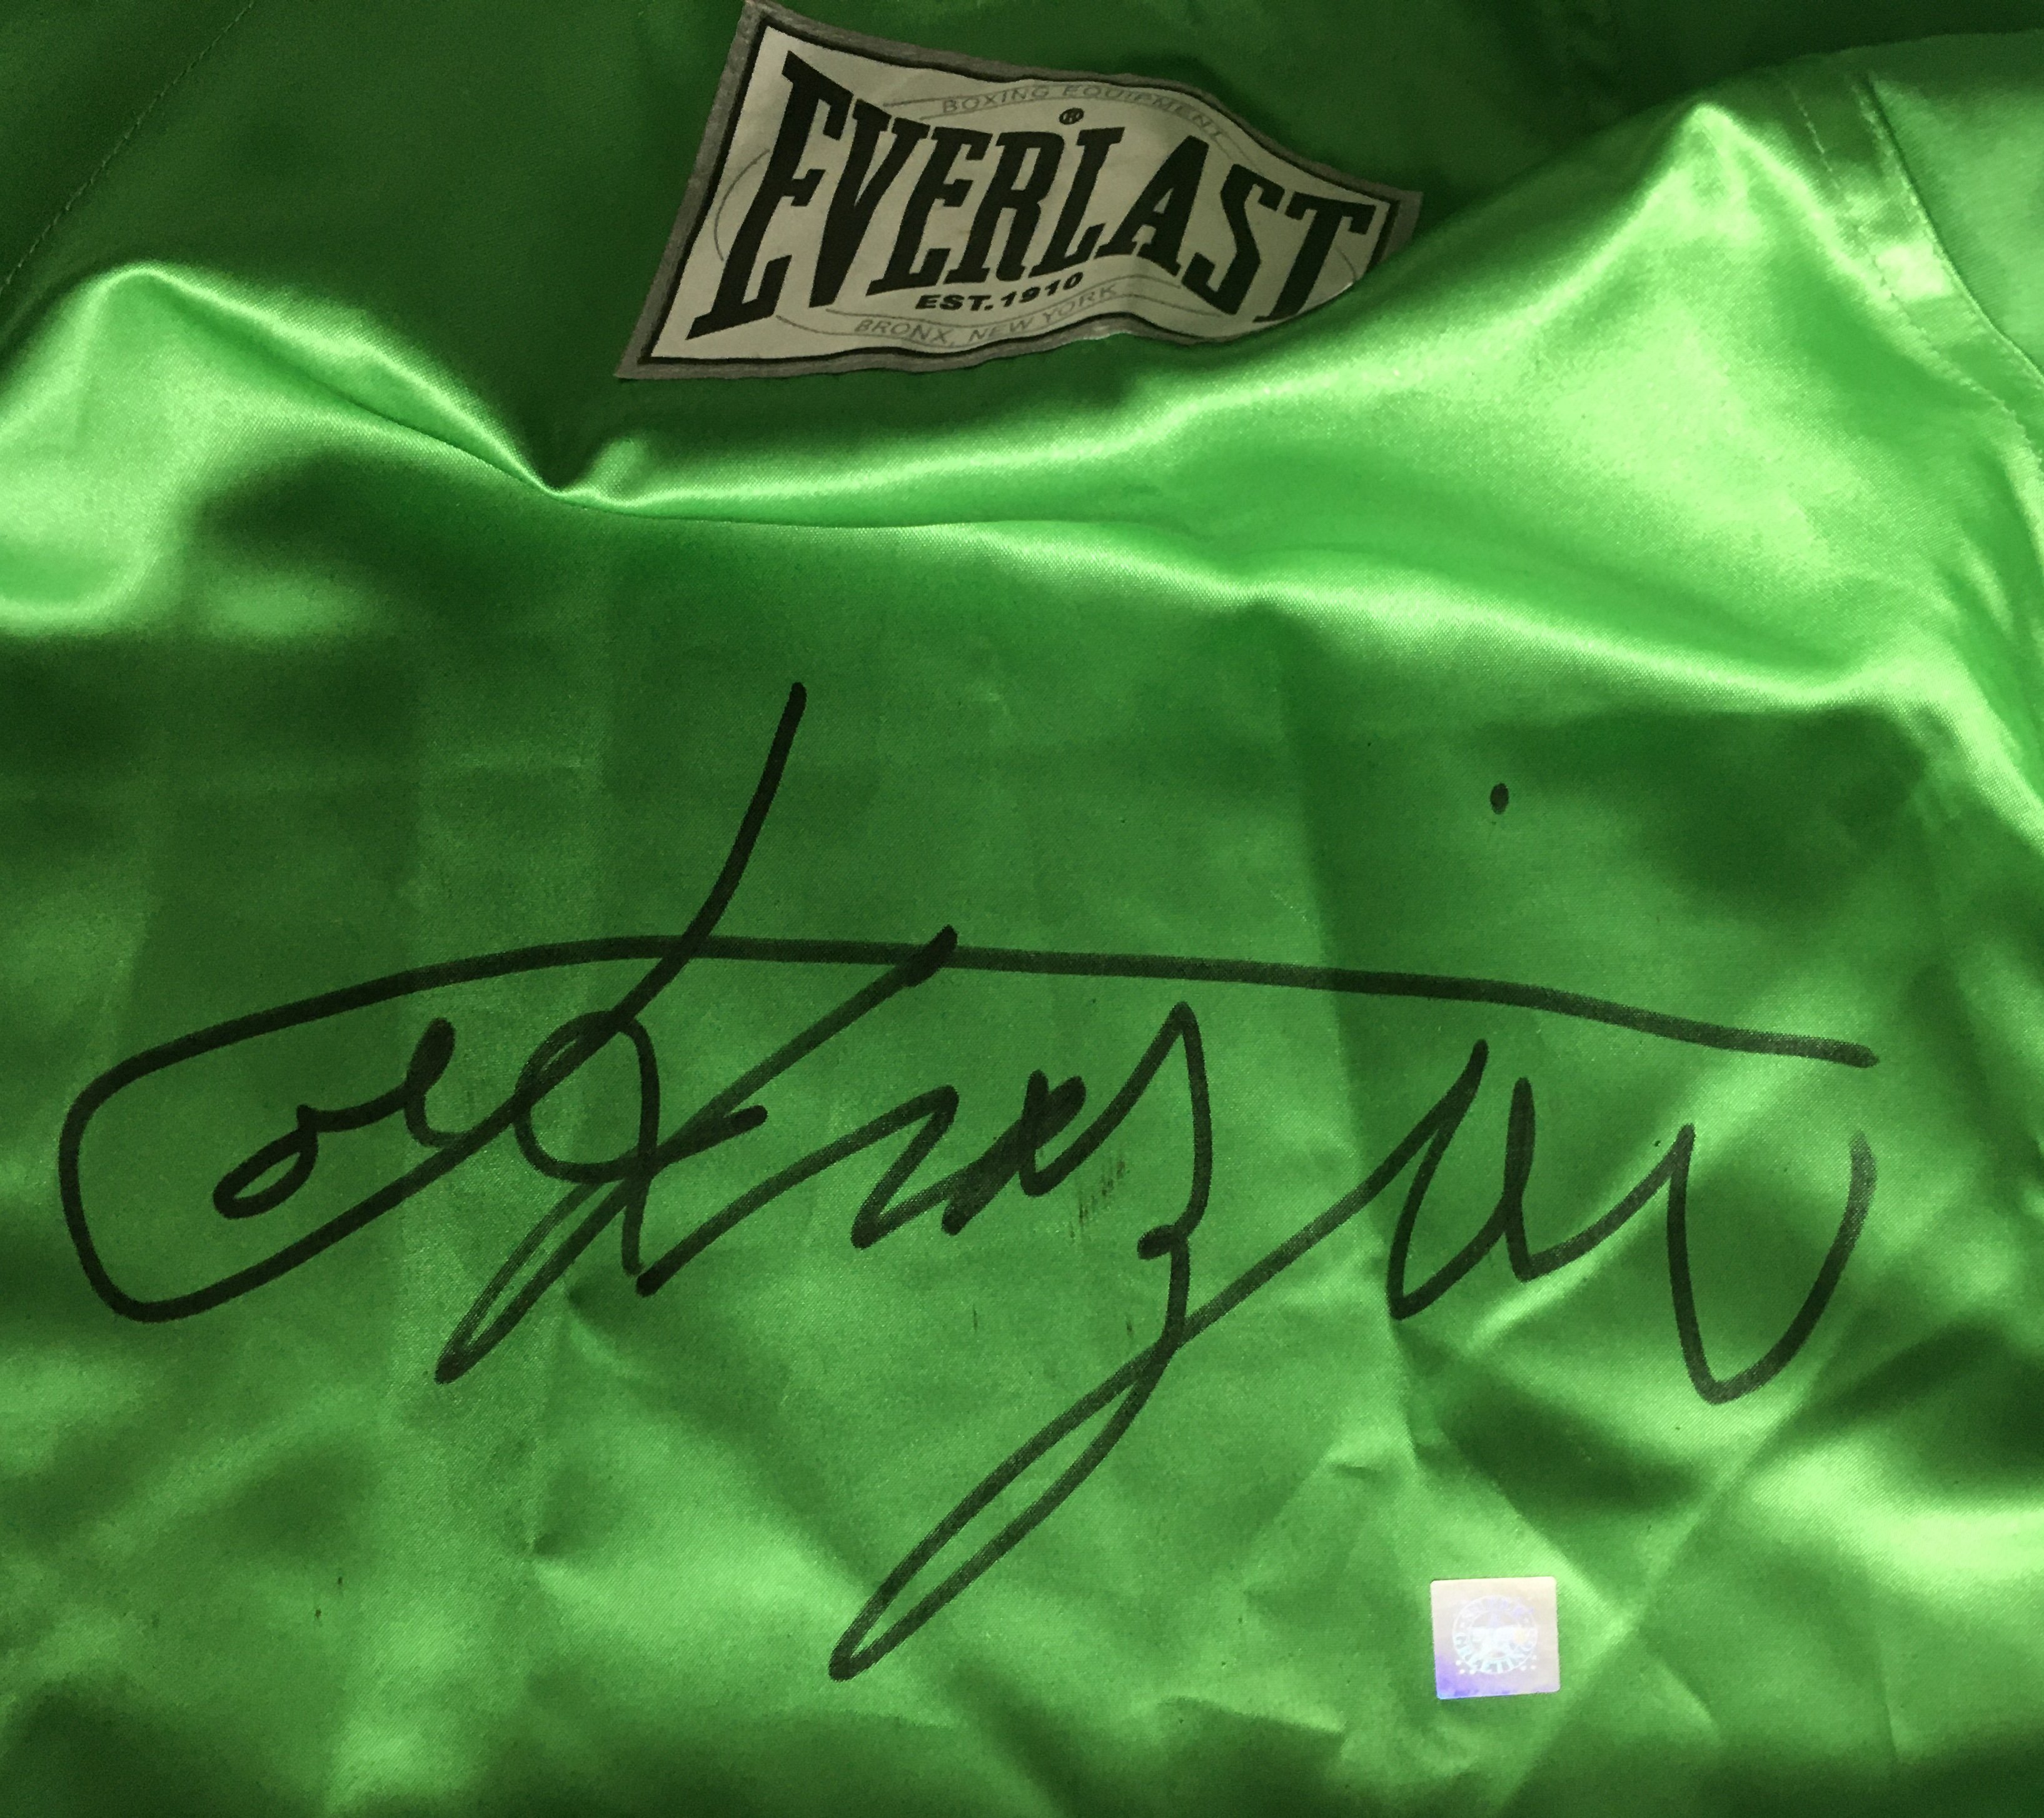 Joe Frazier Signed Boxing Gown: Everlast green lar - Image 2 of 4